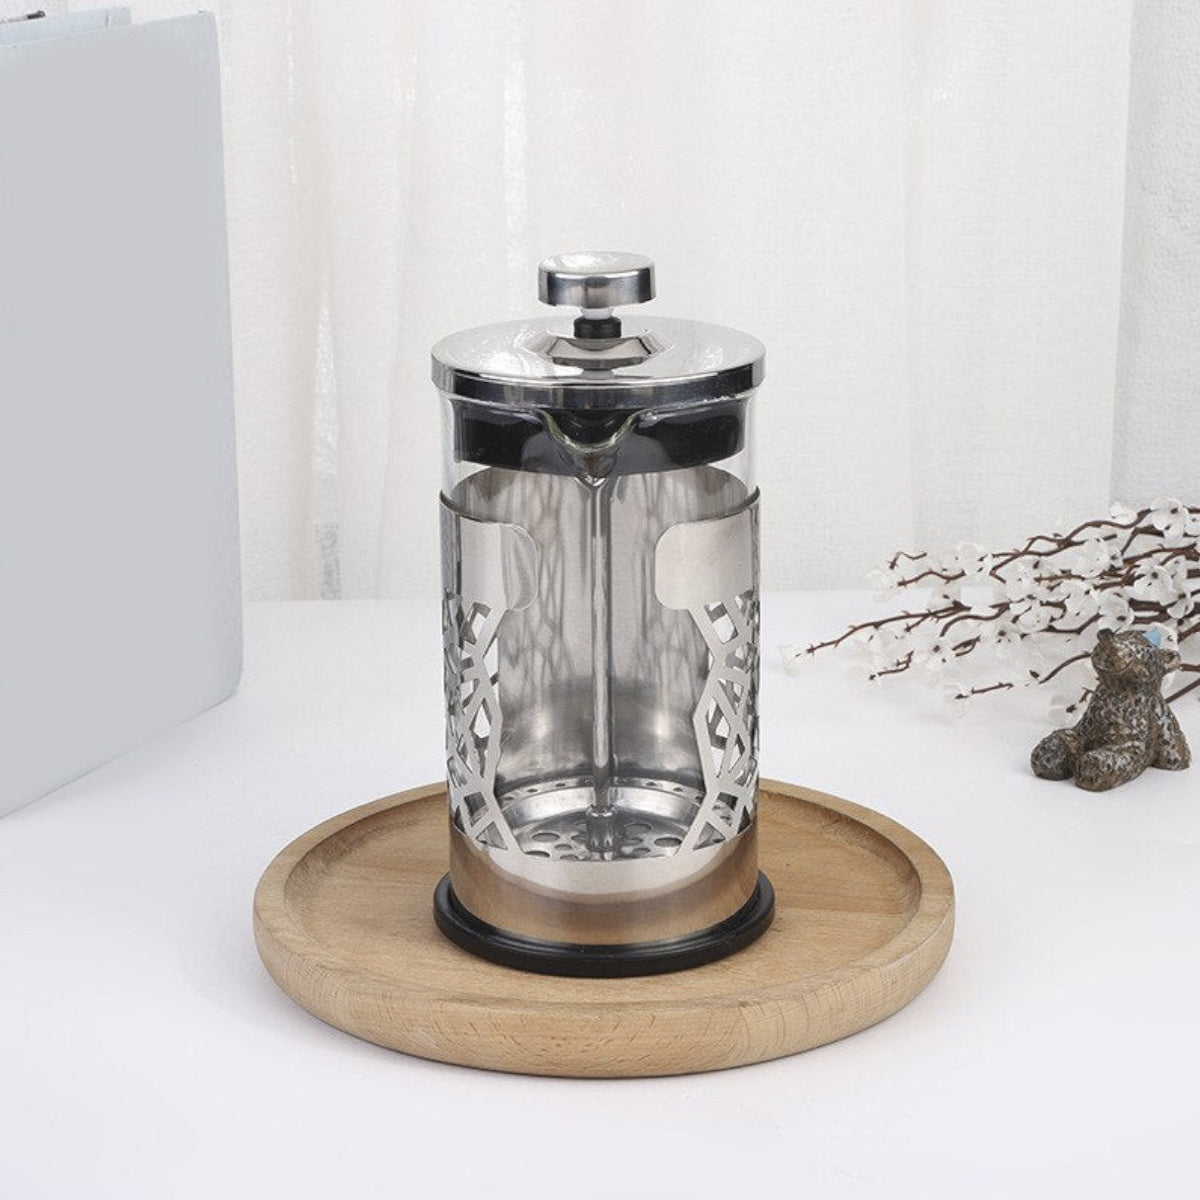 Stainless Steel Body French Press